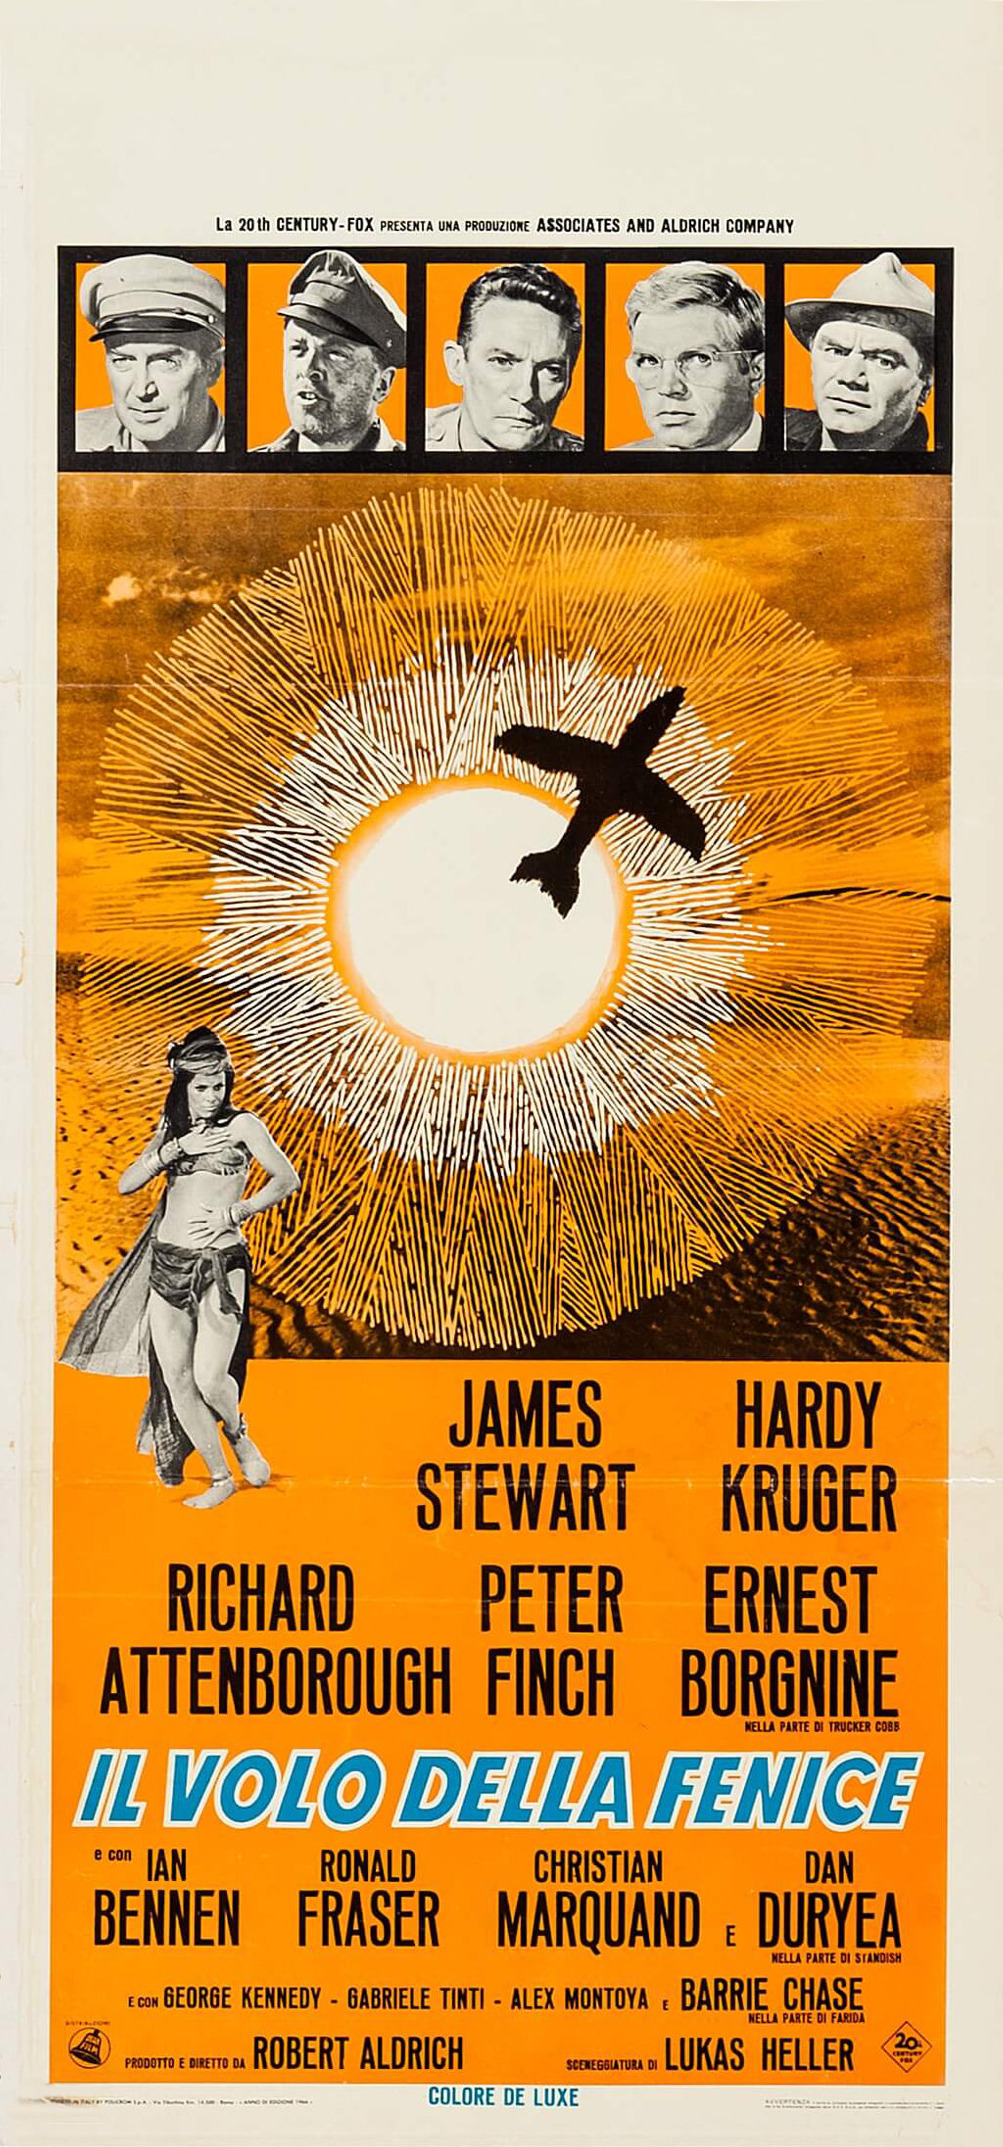 Mega Sized Movie Poster Image for The Flight of the Phoenix (#4 of 4)